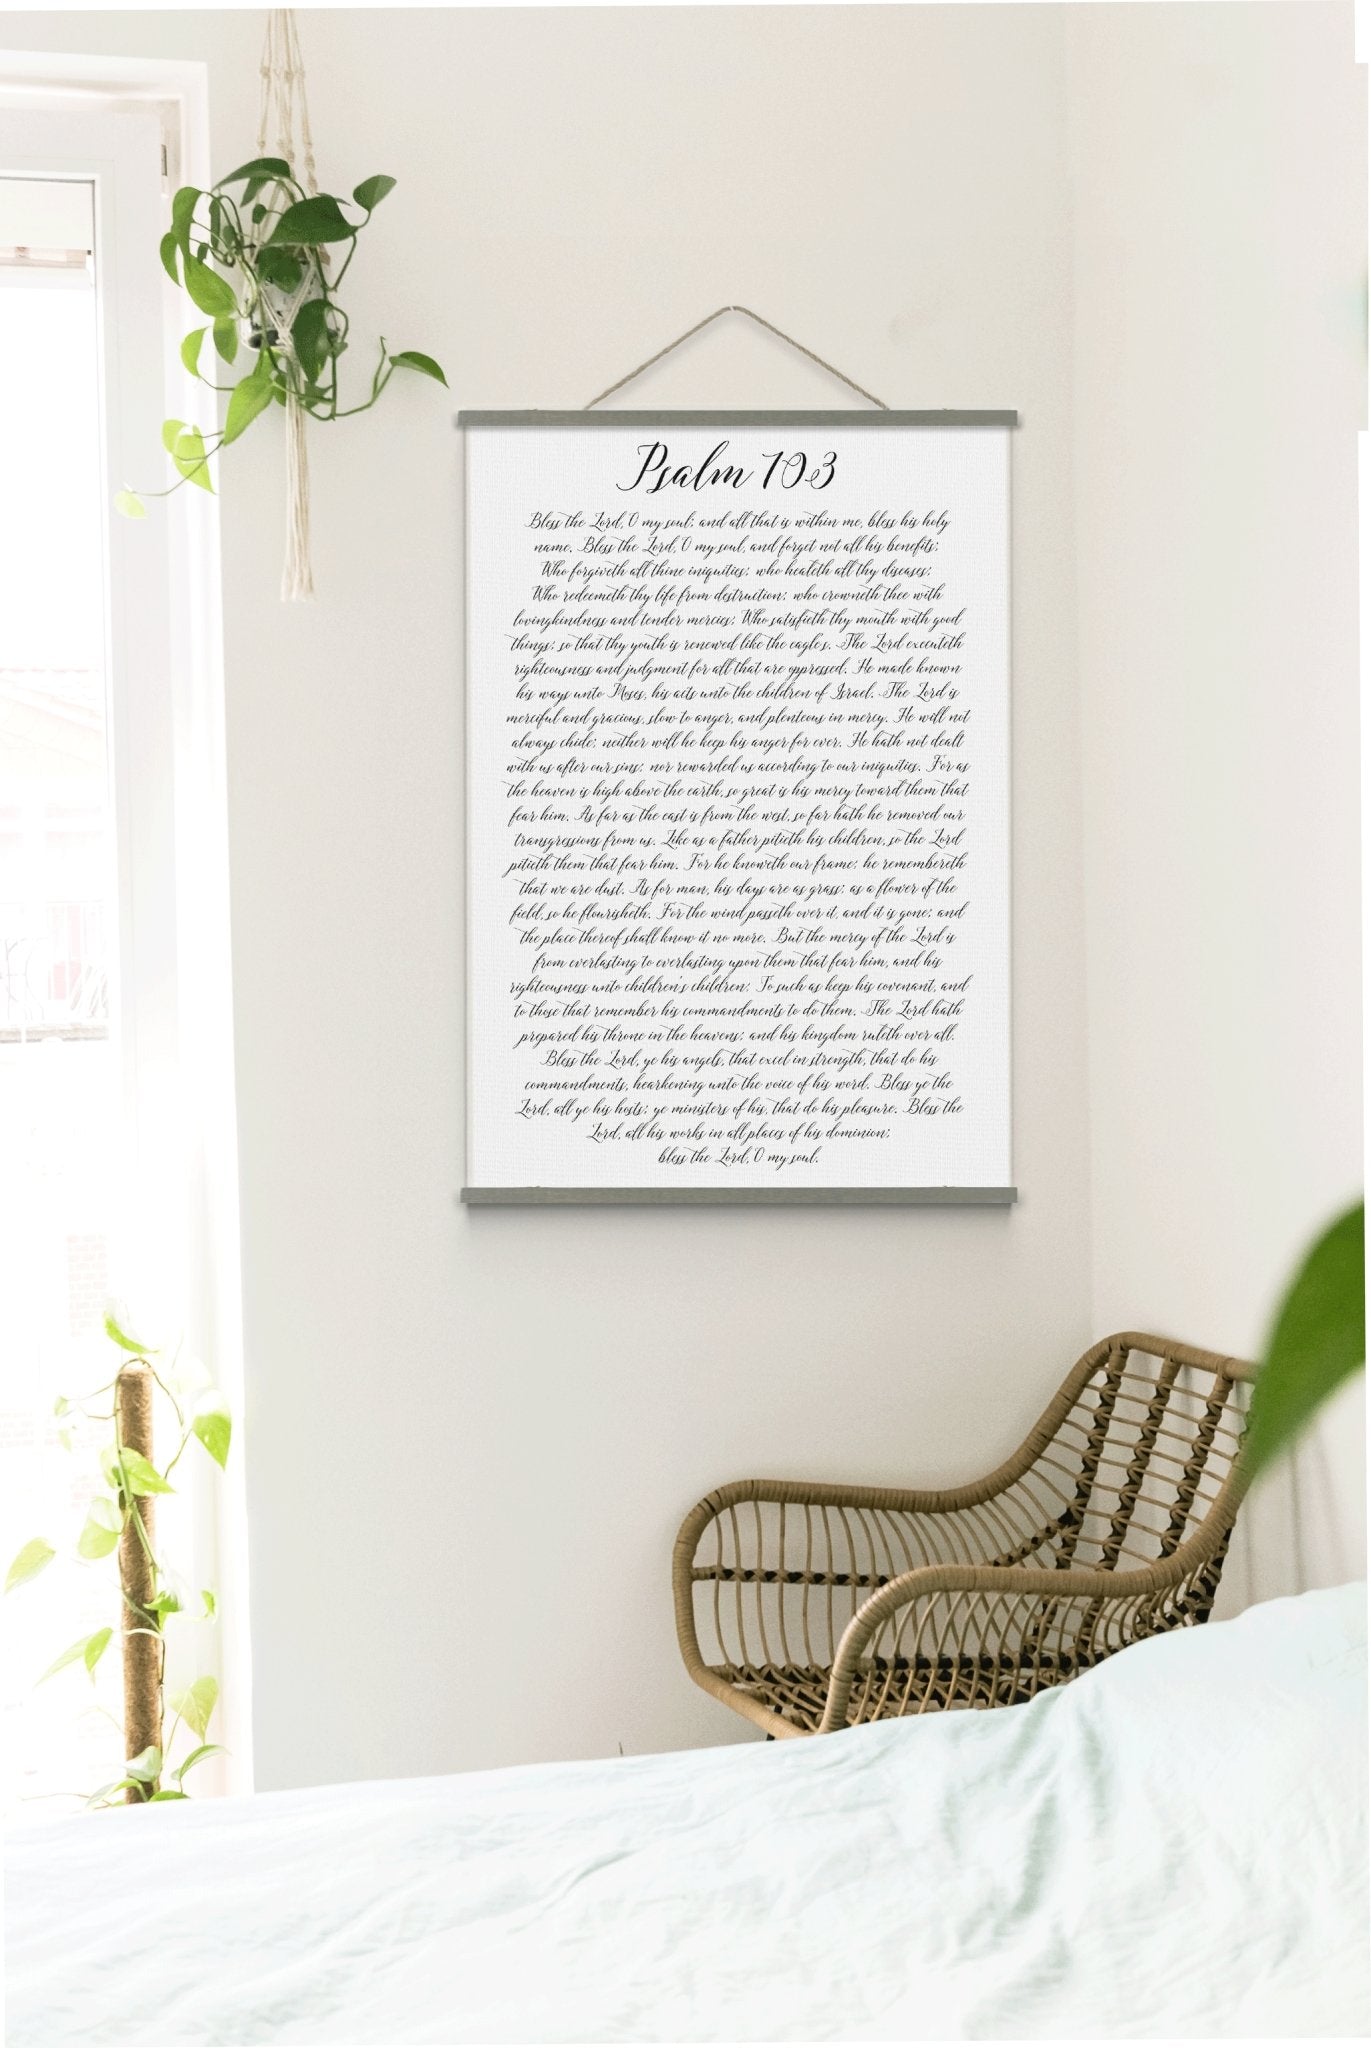 Psalm 103 Scripture Hanging Canvas - Forever Written